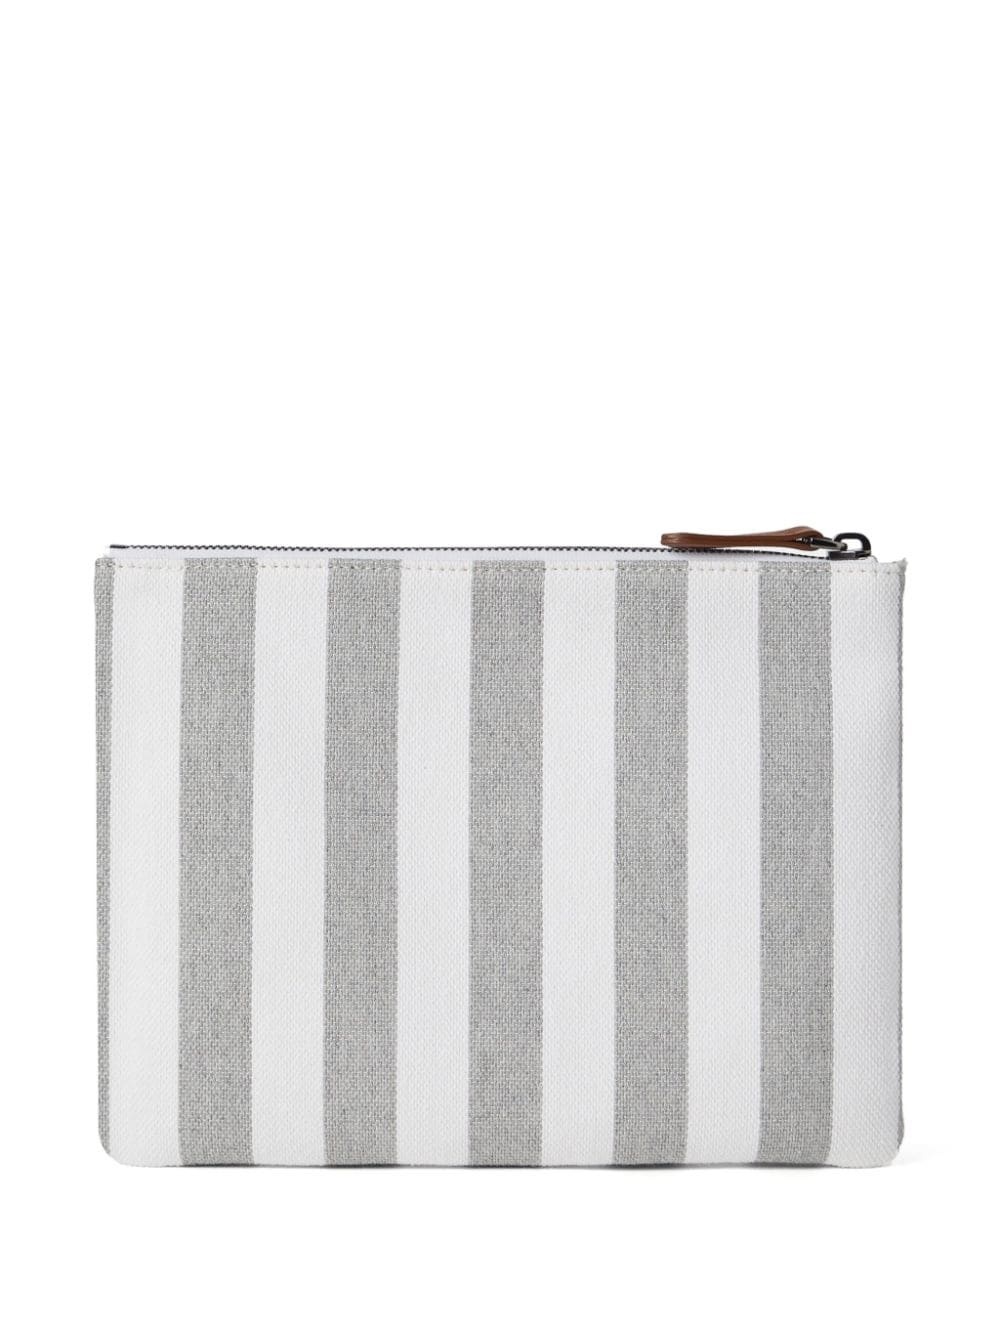 logo-embroidered striped clutch bag - 2